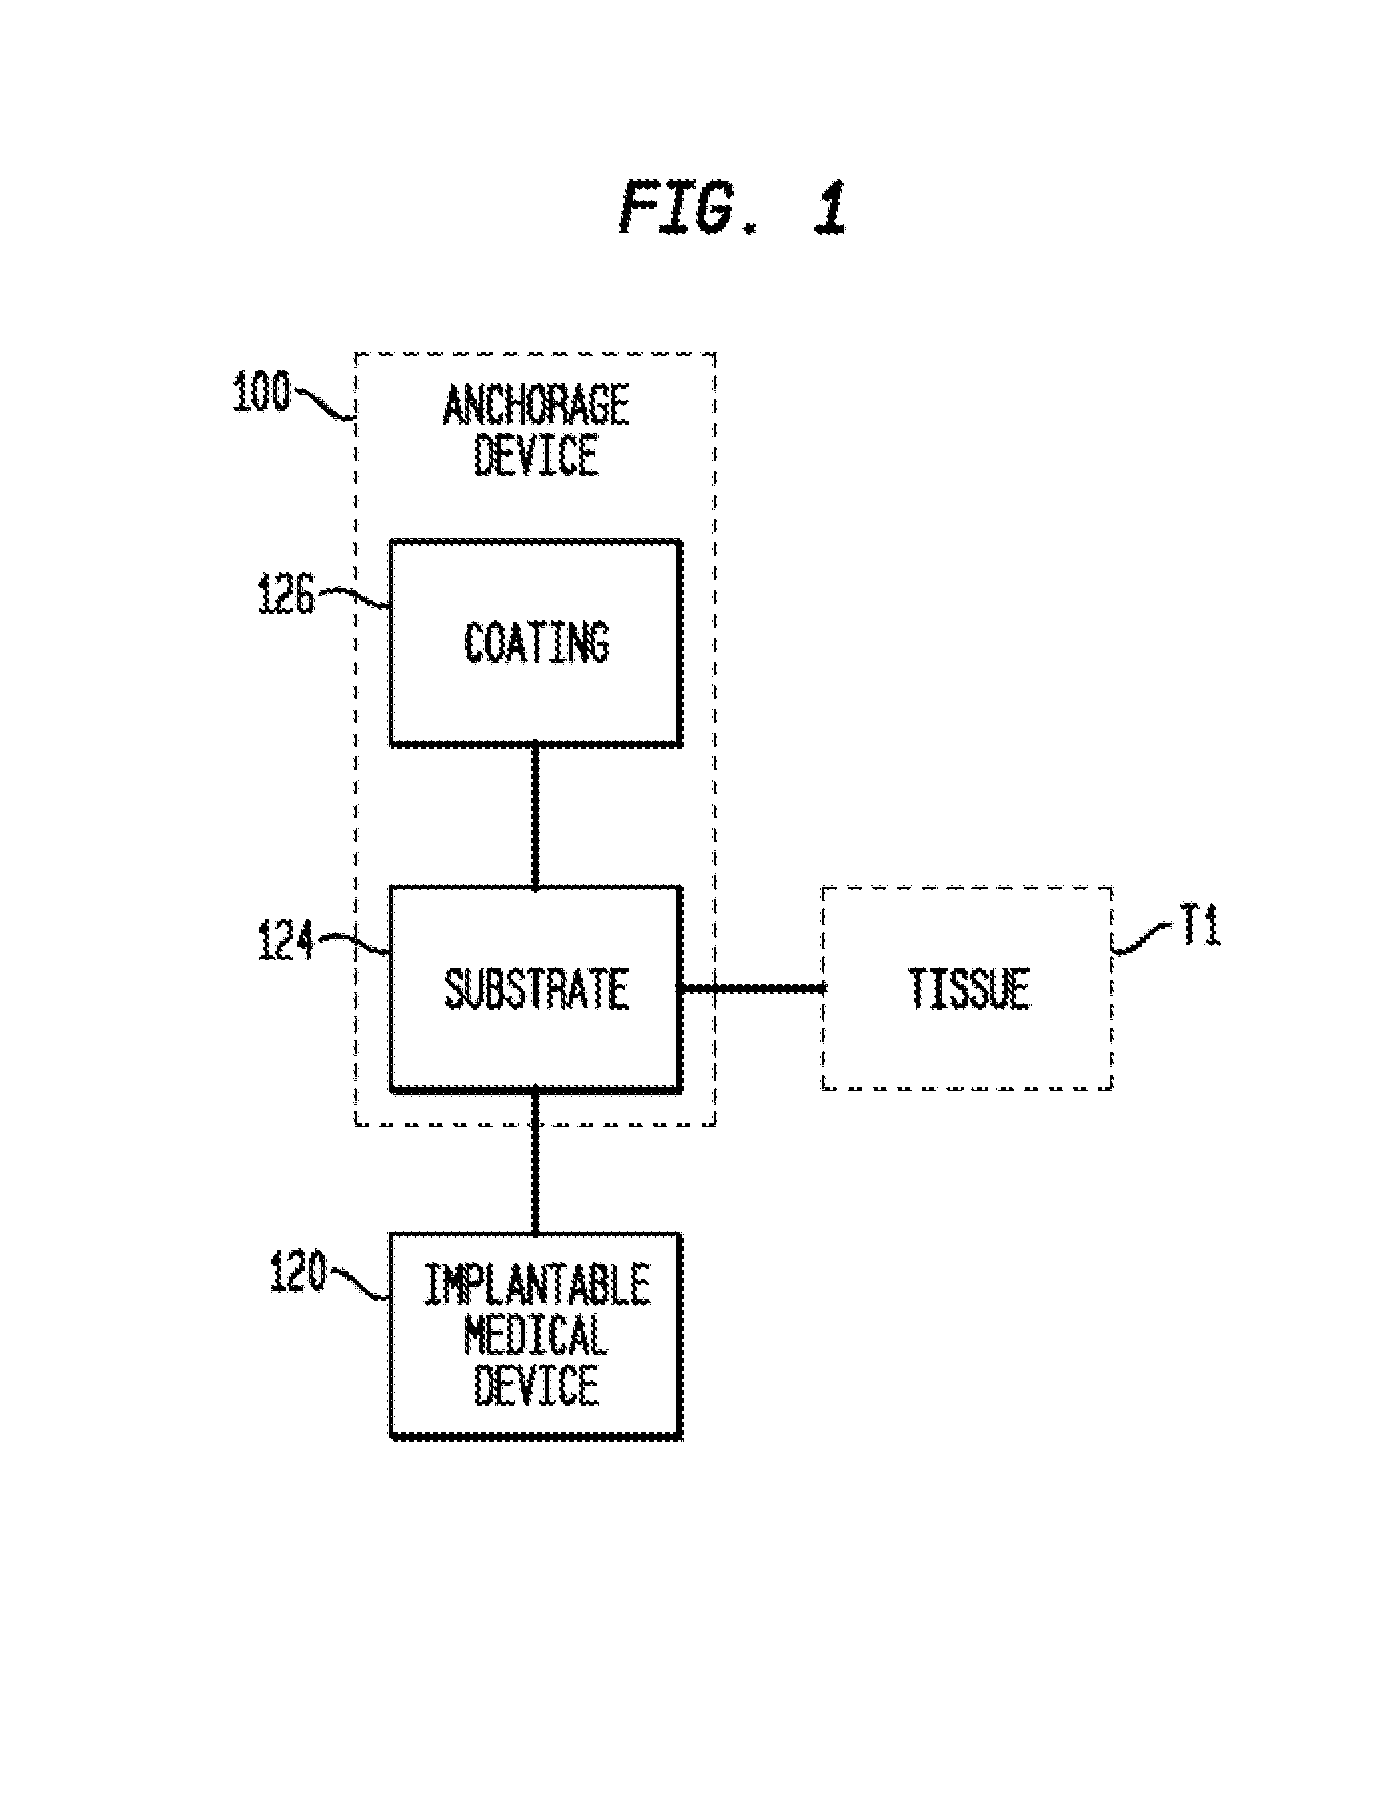 Anchorage Devices Comprising an Active Pharmaceutical Ingredient